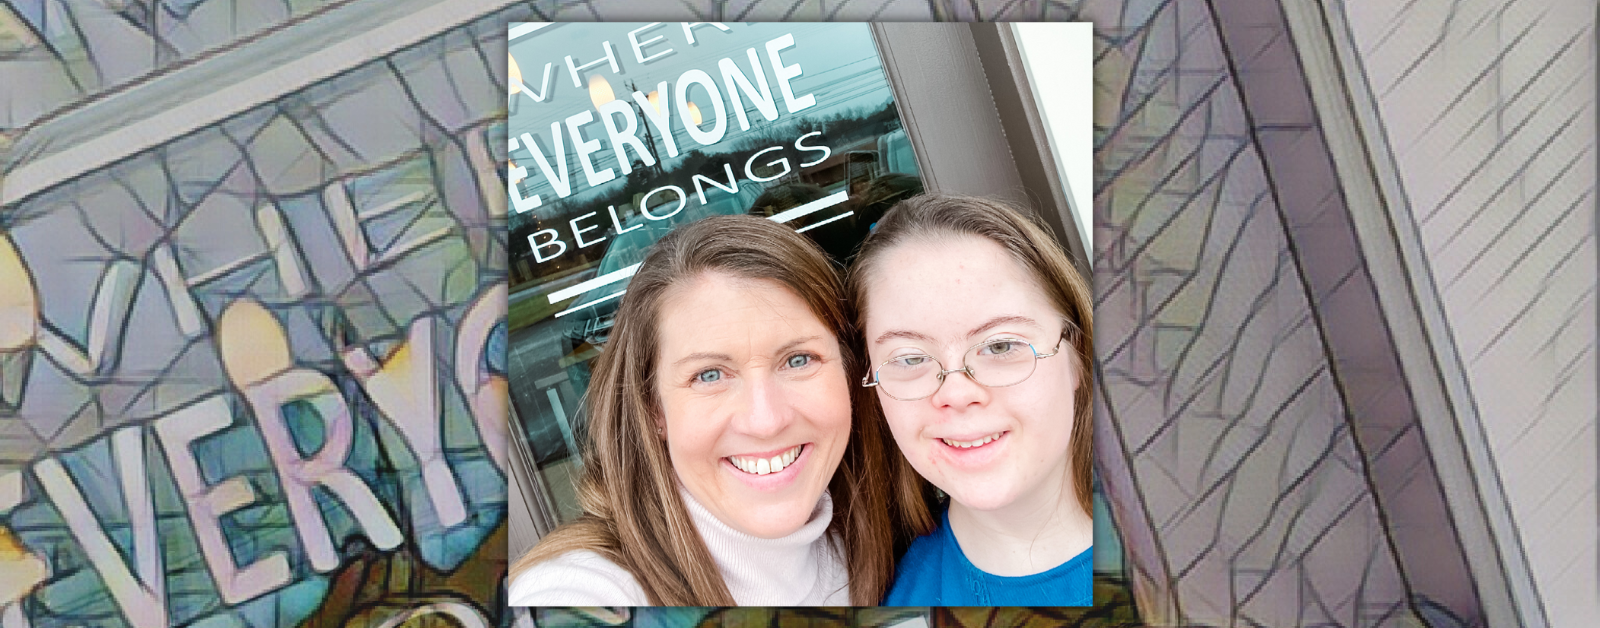 mosaic filter on background with photo of Amy Julia and Penny smile and take a selfie in front of BeanZ and Co. "Where Everyone Belongs" is stenciled on the glass door behind them